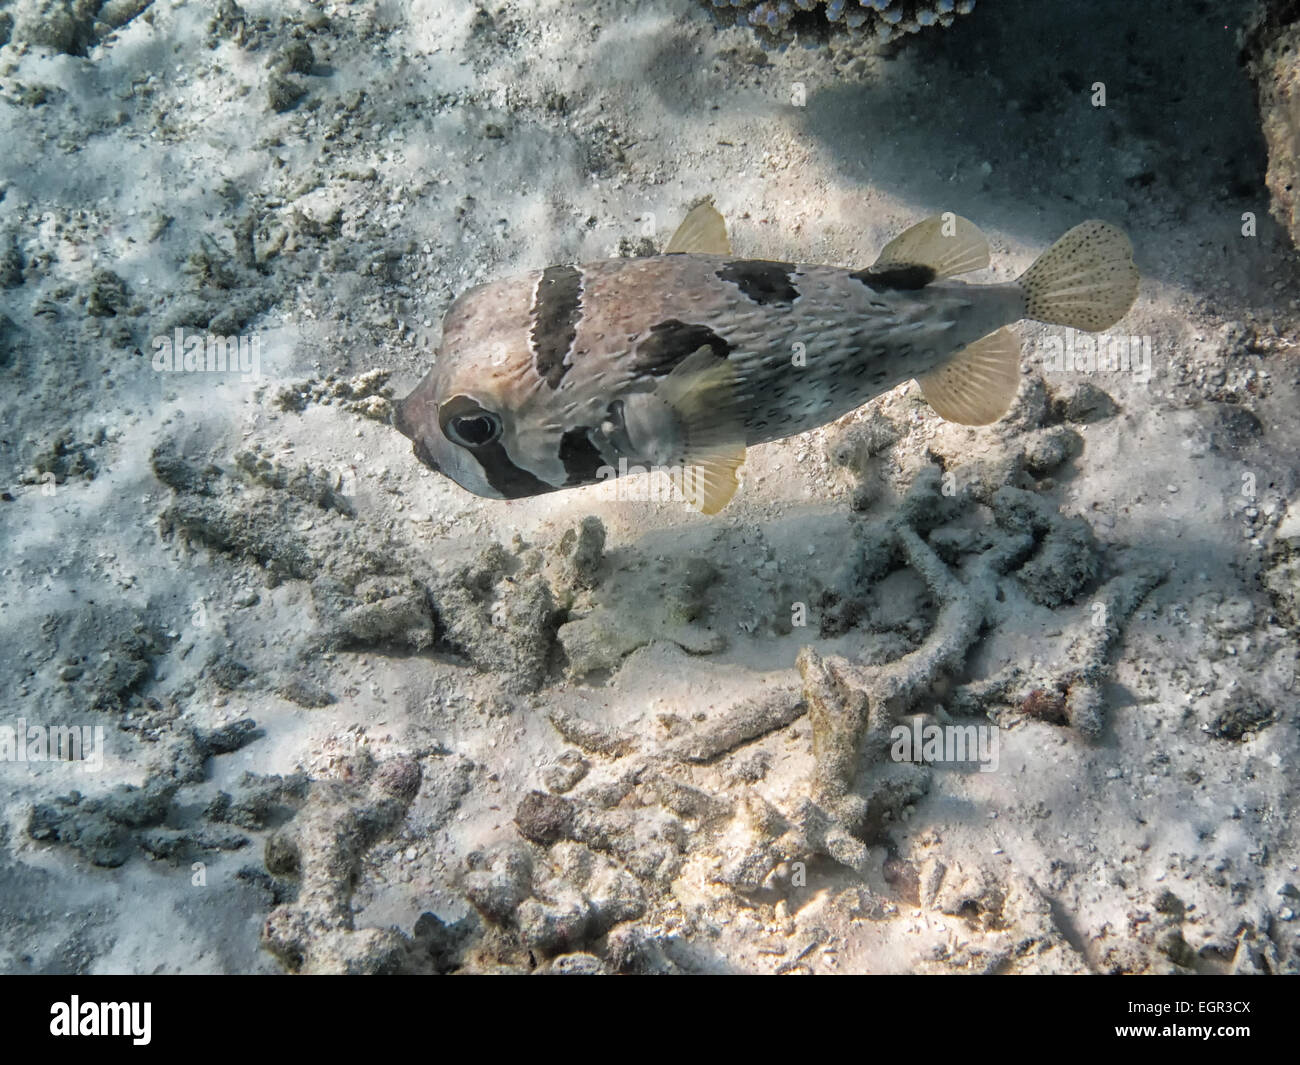 Blotched porcupine fish (Diodon liturosus) on a coral reef in the Maldives Stock Photo